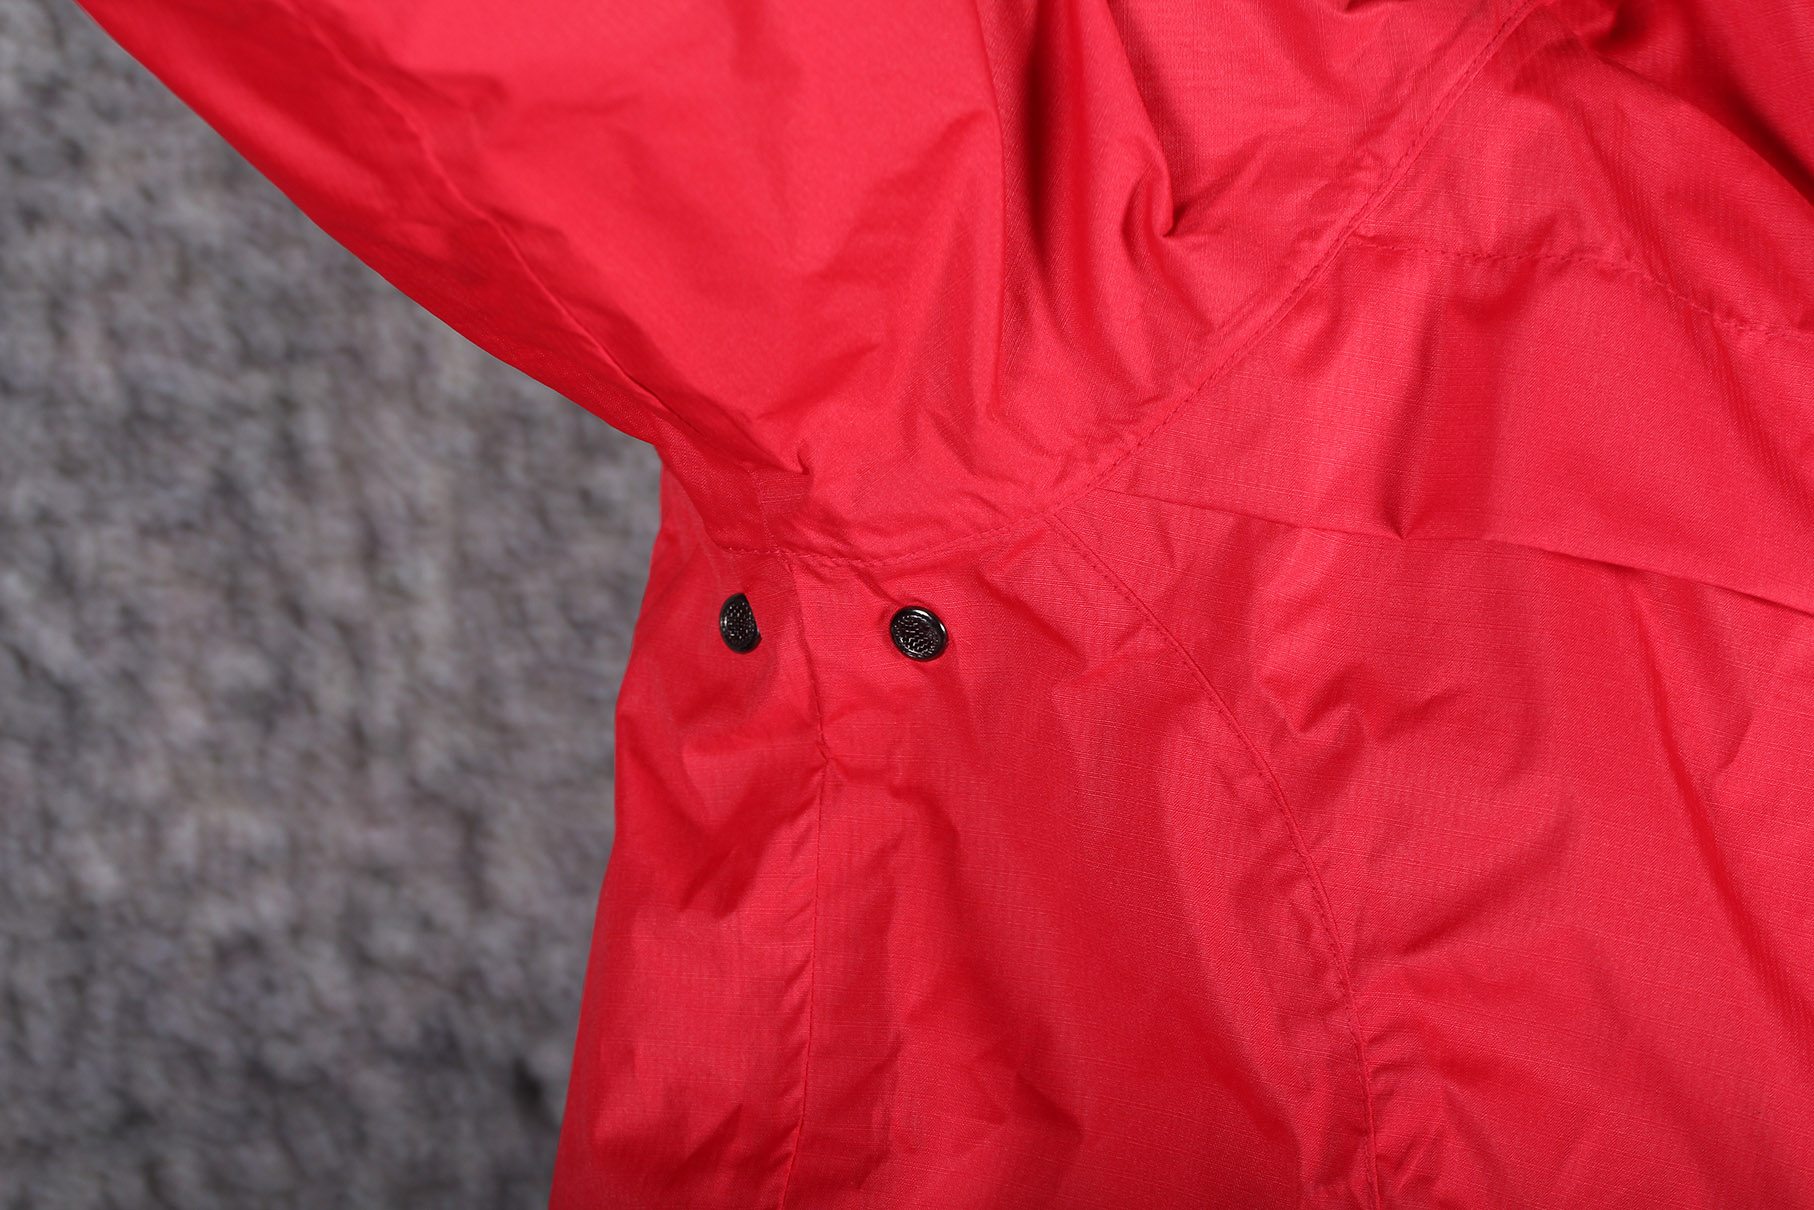 Review: Visijax Highlight Jacket with LEDs | road.cc